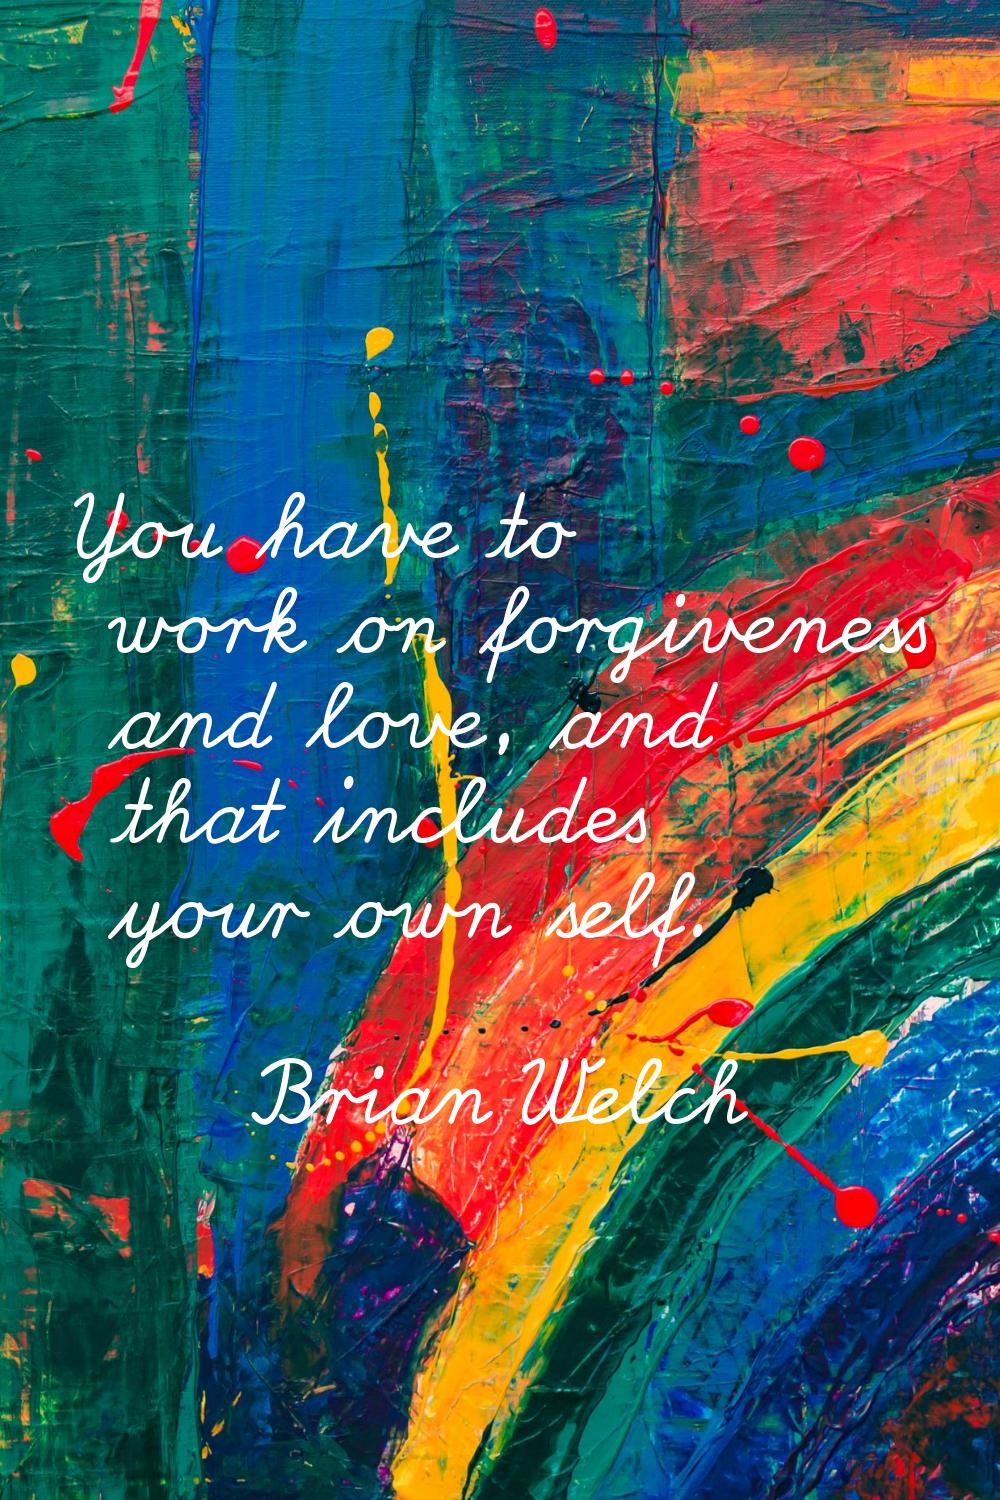 You have to work on forgiveness and love, and that includes your own self.